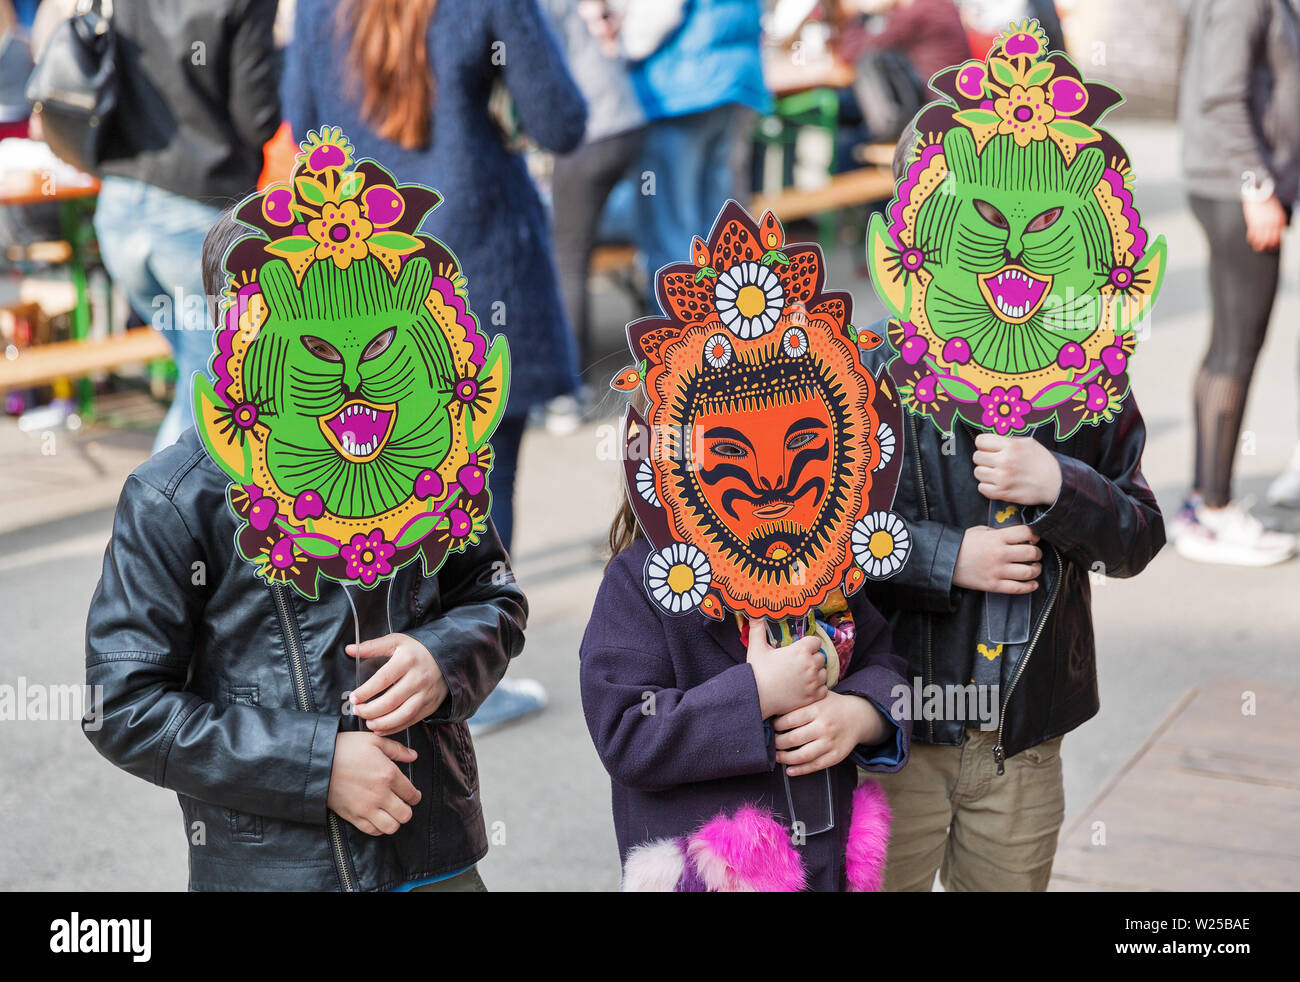 KYIV, UKRAINE - APRIL 21, 2019: Children wear funny monster mask during Food and Wine Festival in National Expocenter, a permanent multi-purpose exhib Stock Photo